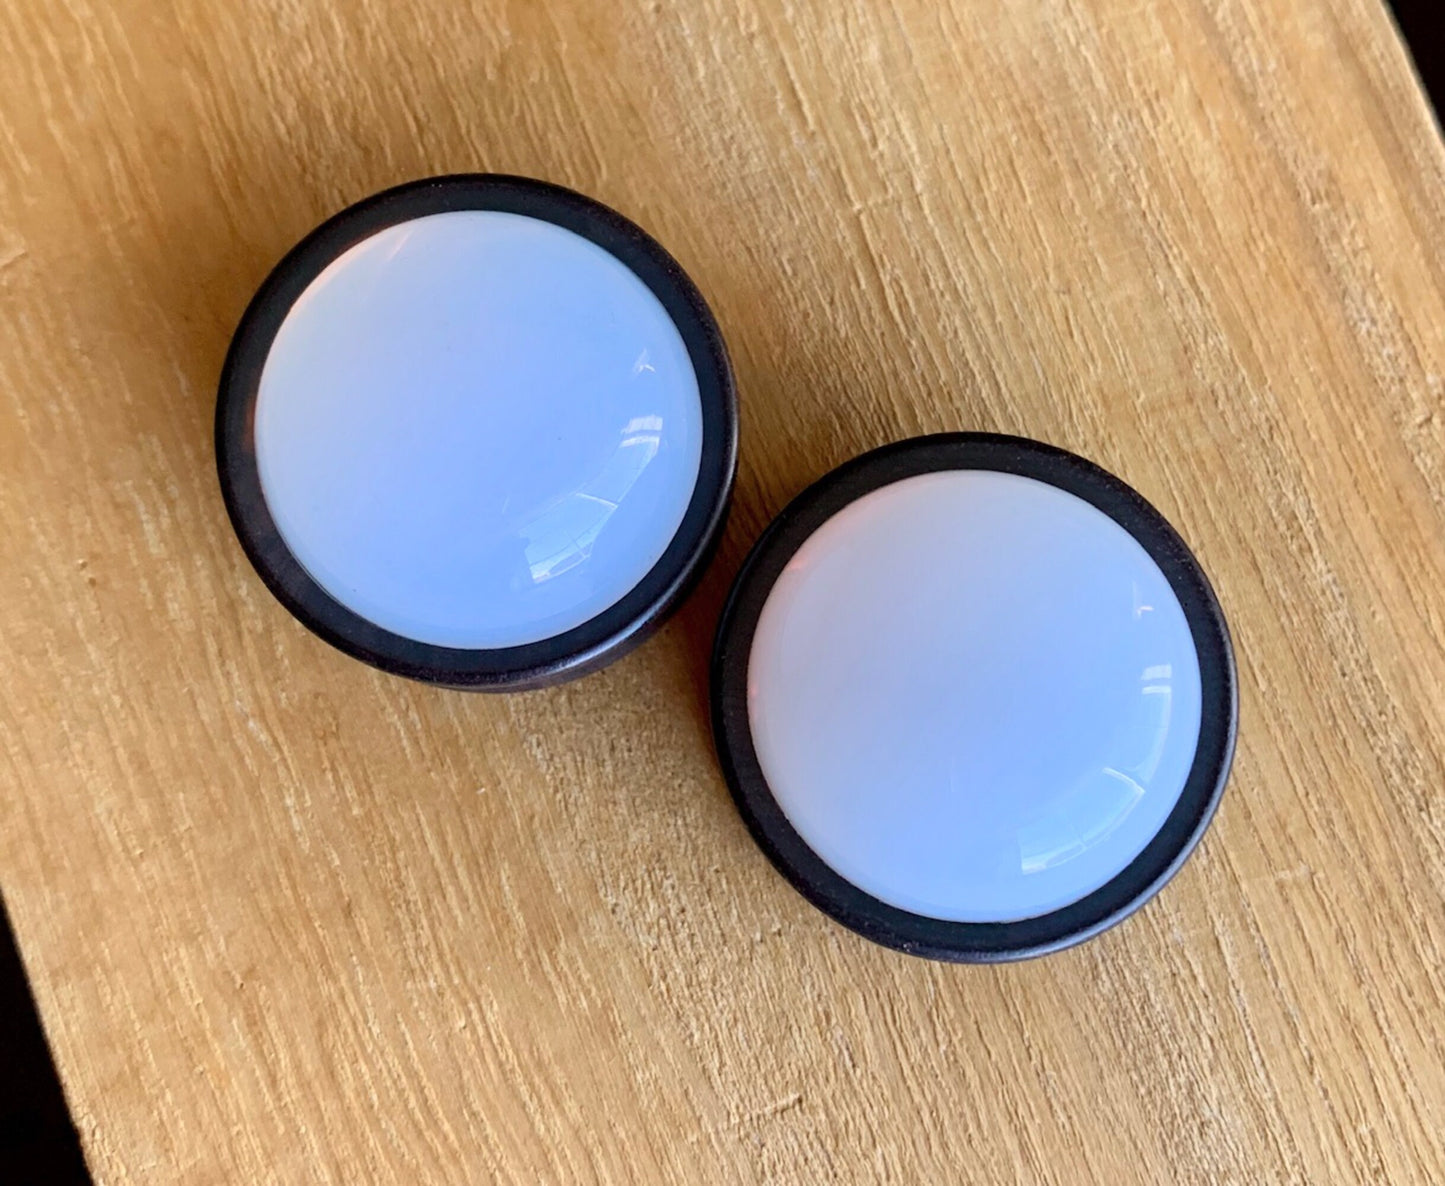 PAIR of Beautiful Opalite Stone Dome Ebony Organic Wood Plugs - Gauges 2g (6mm) to 1" (25mm) available!